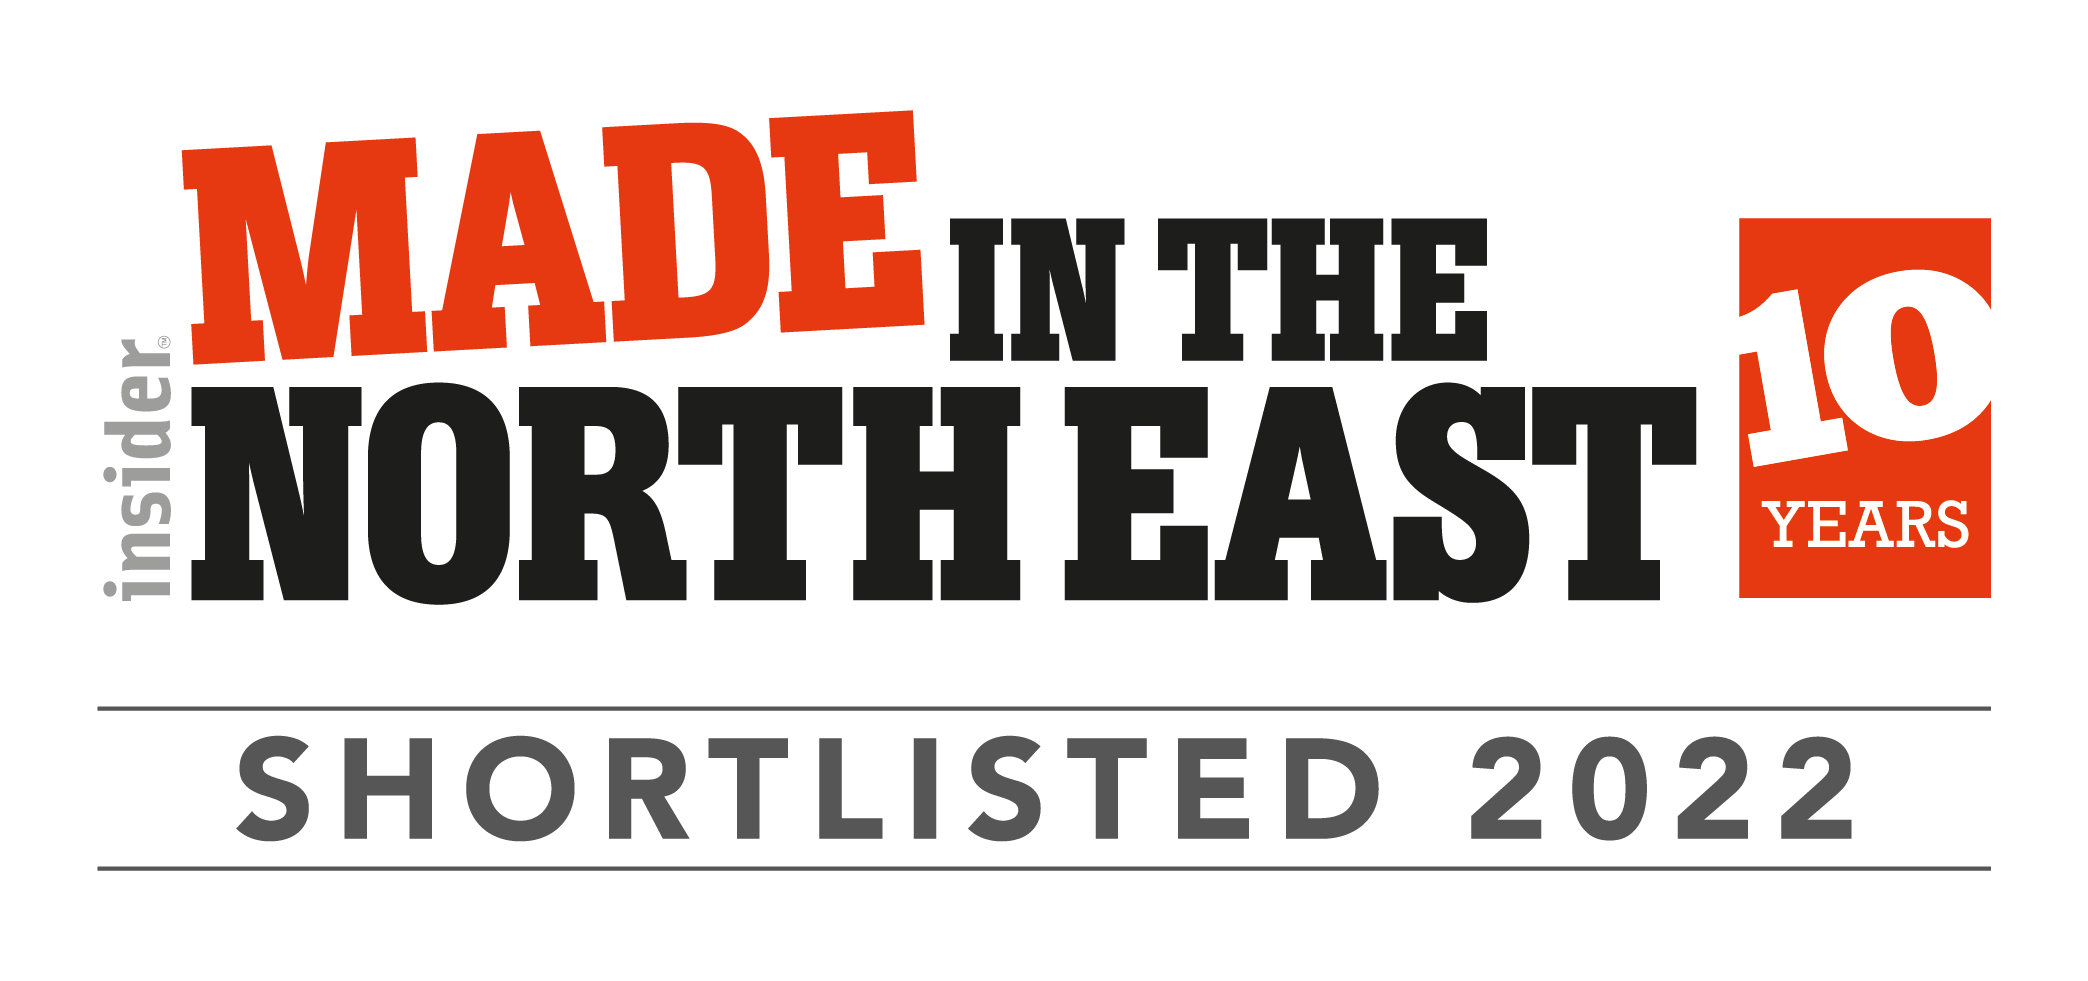 Pleased to announce GC has been shortlisted for the Made in North East Awards 2022